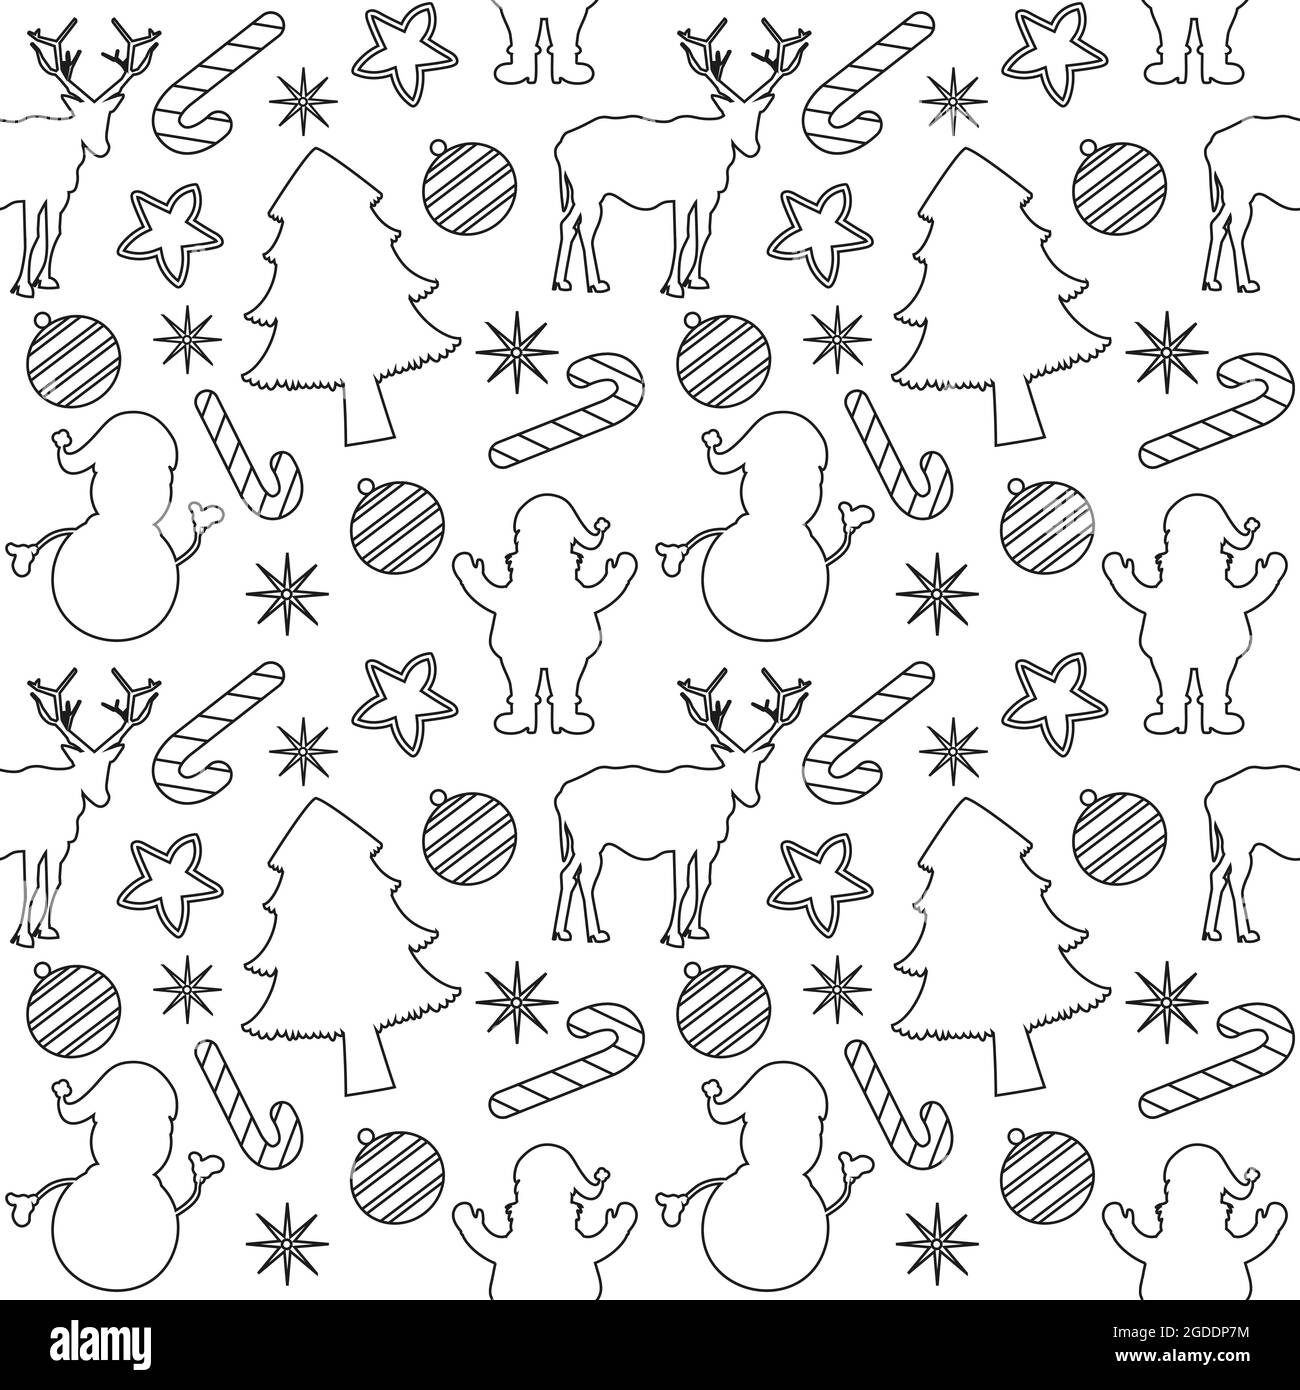 Christmas Background Seamless Pattern With Santa Claus, Tree, Socks, Snowman And Gifts For Landing Page, Wallpaper Or Decoration Stock Vector